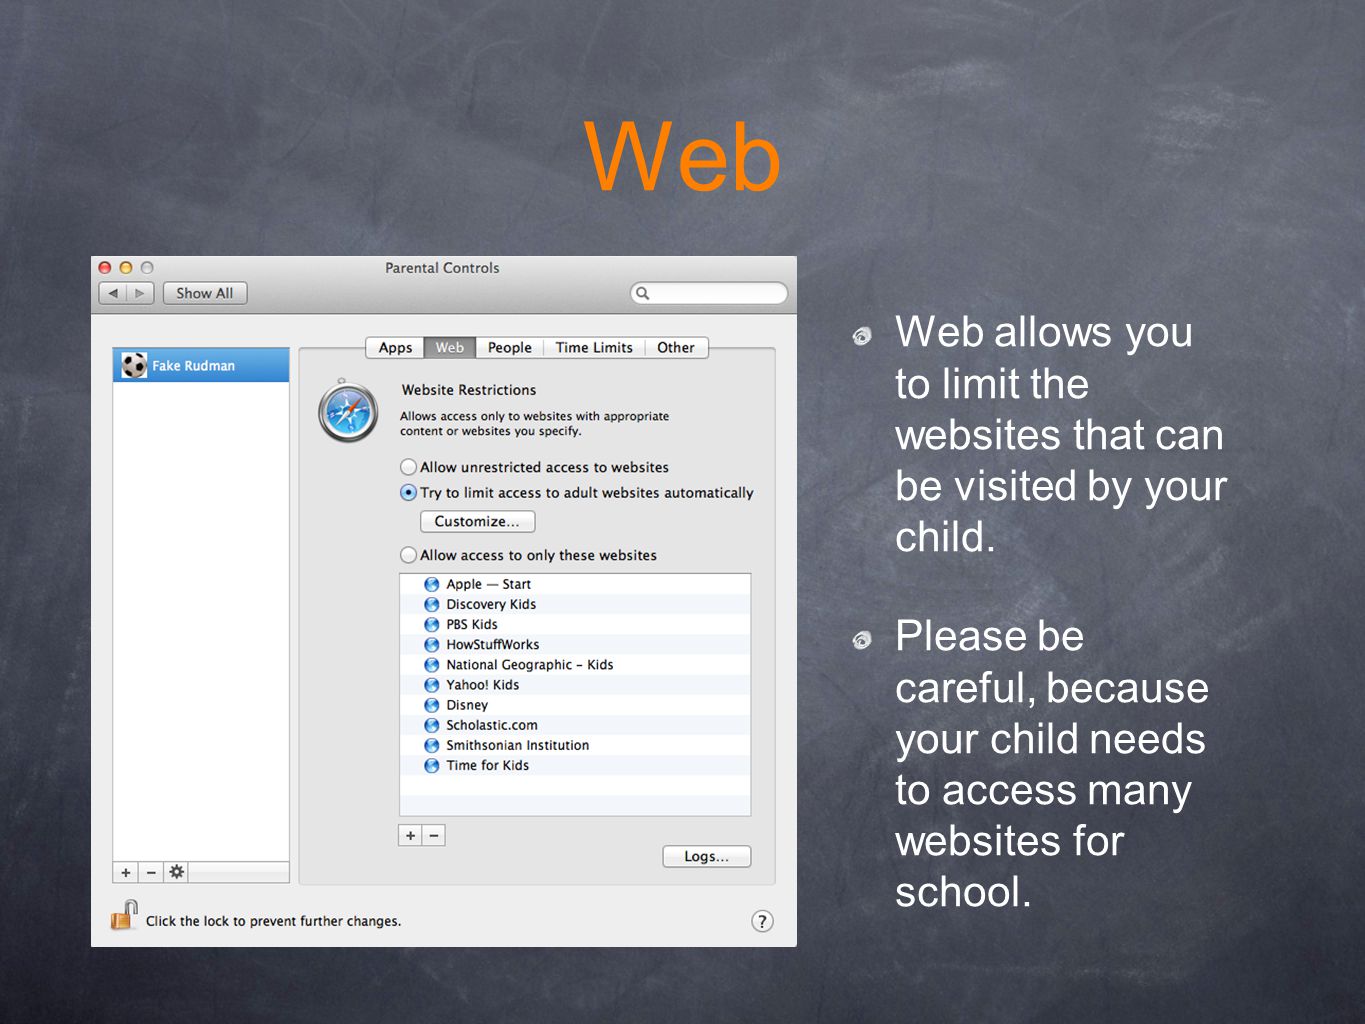 Web Web allows you to limit the websites that can be visited by your child.